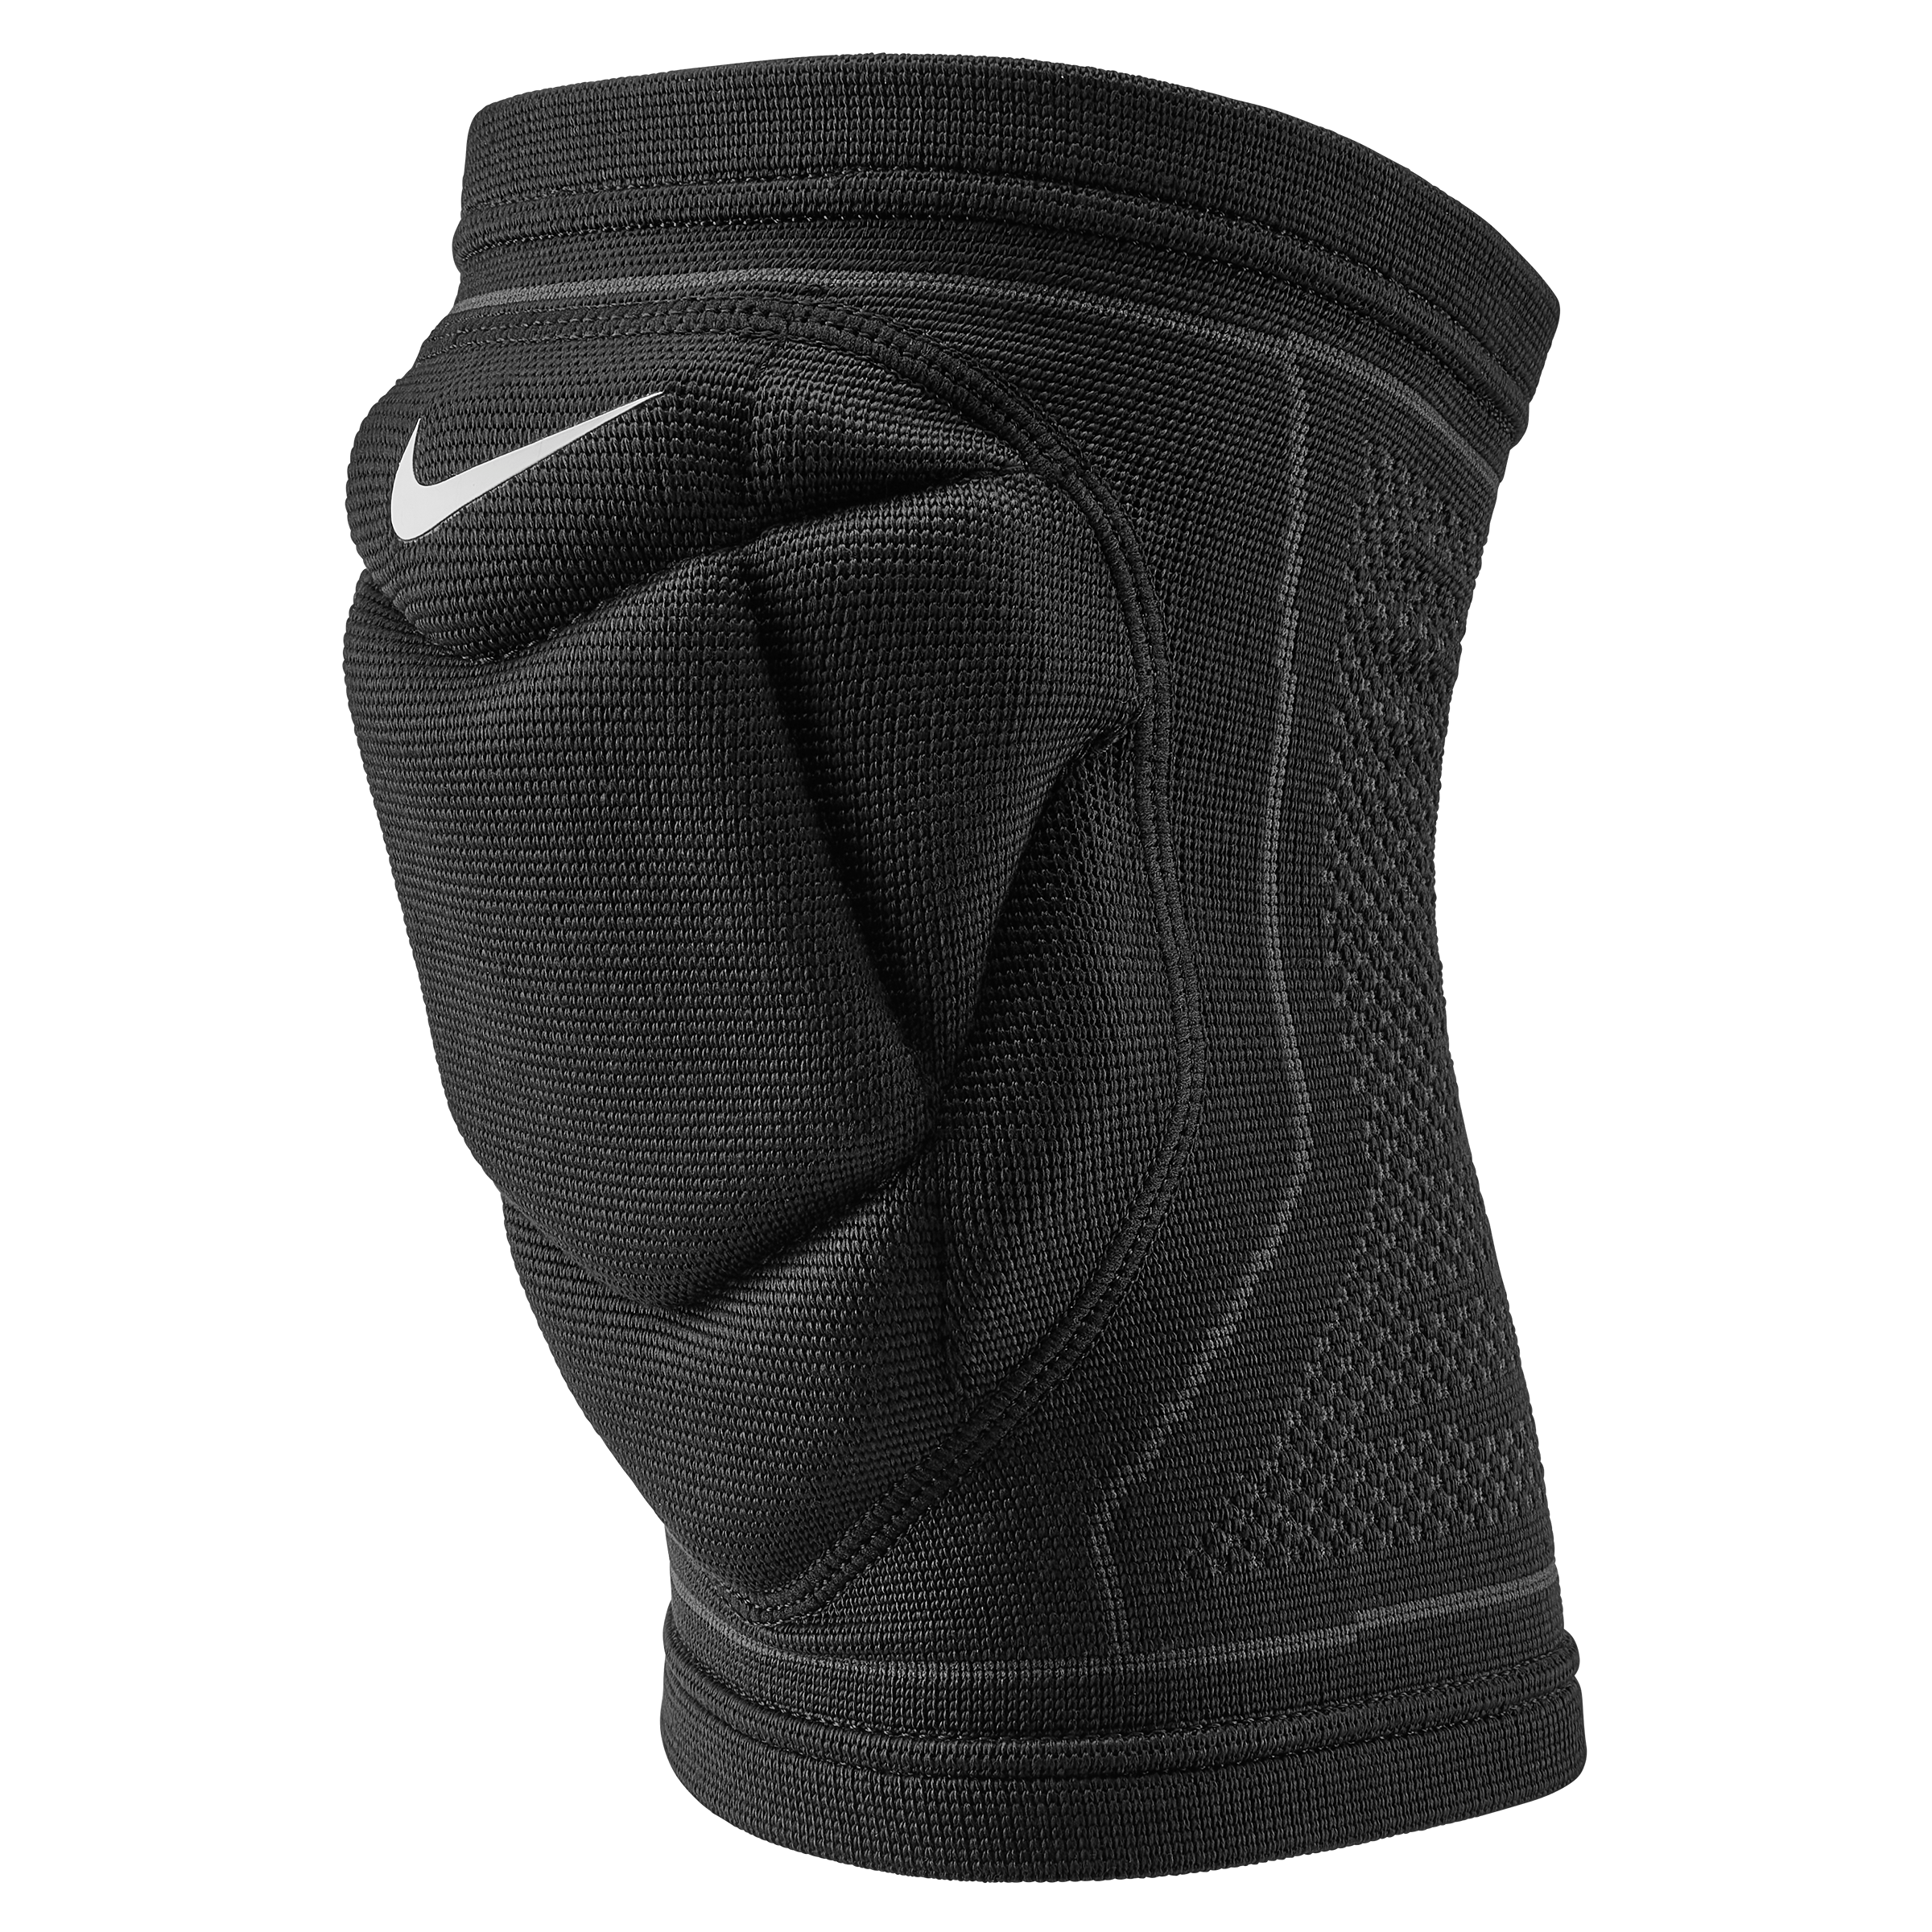 Nike Football Knee Pad Inserts NEW SHIPS TODAY QUANTITY AVAILABLE